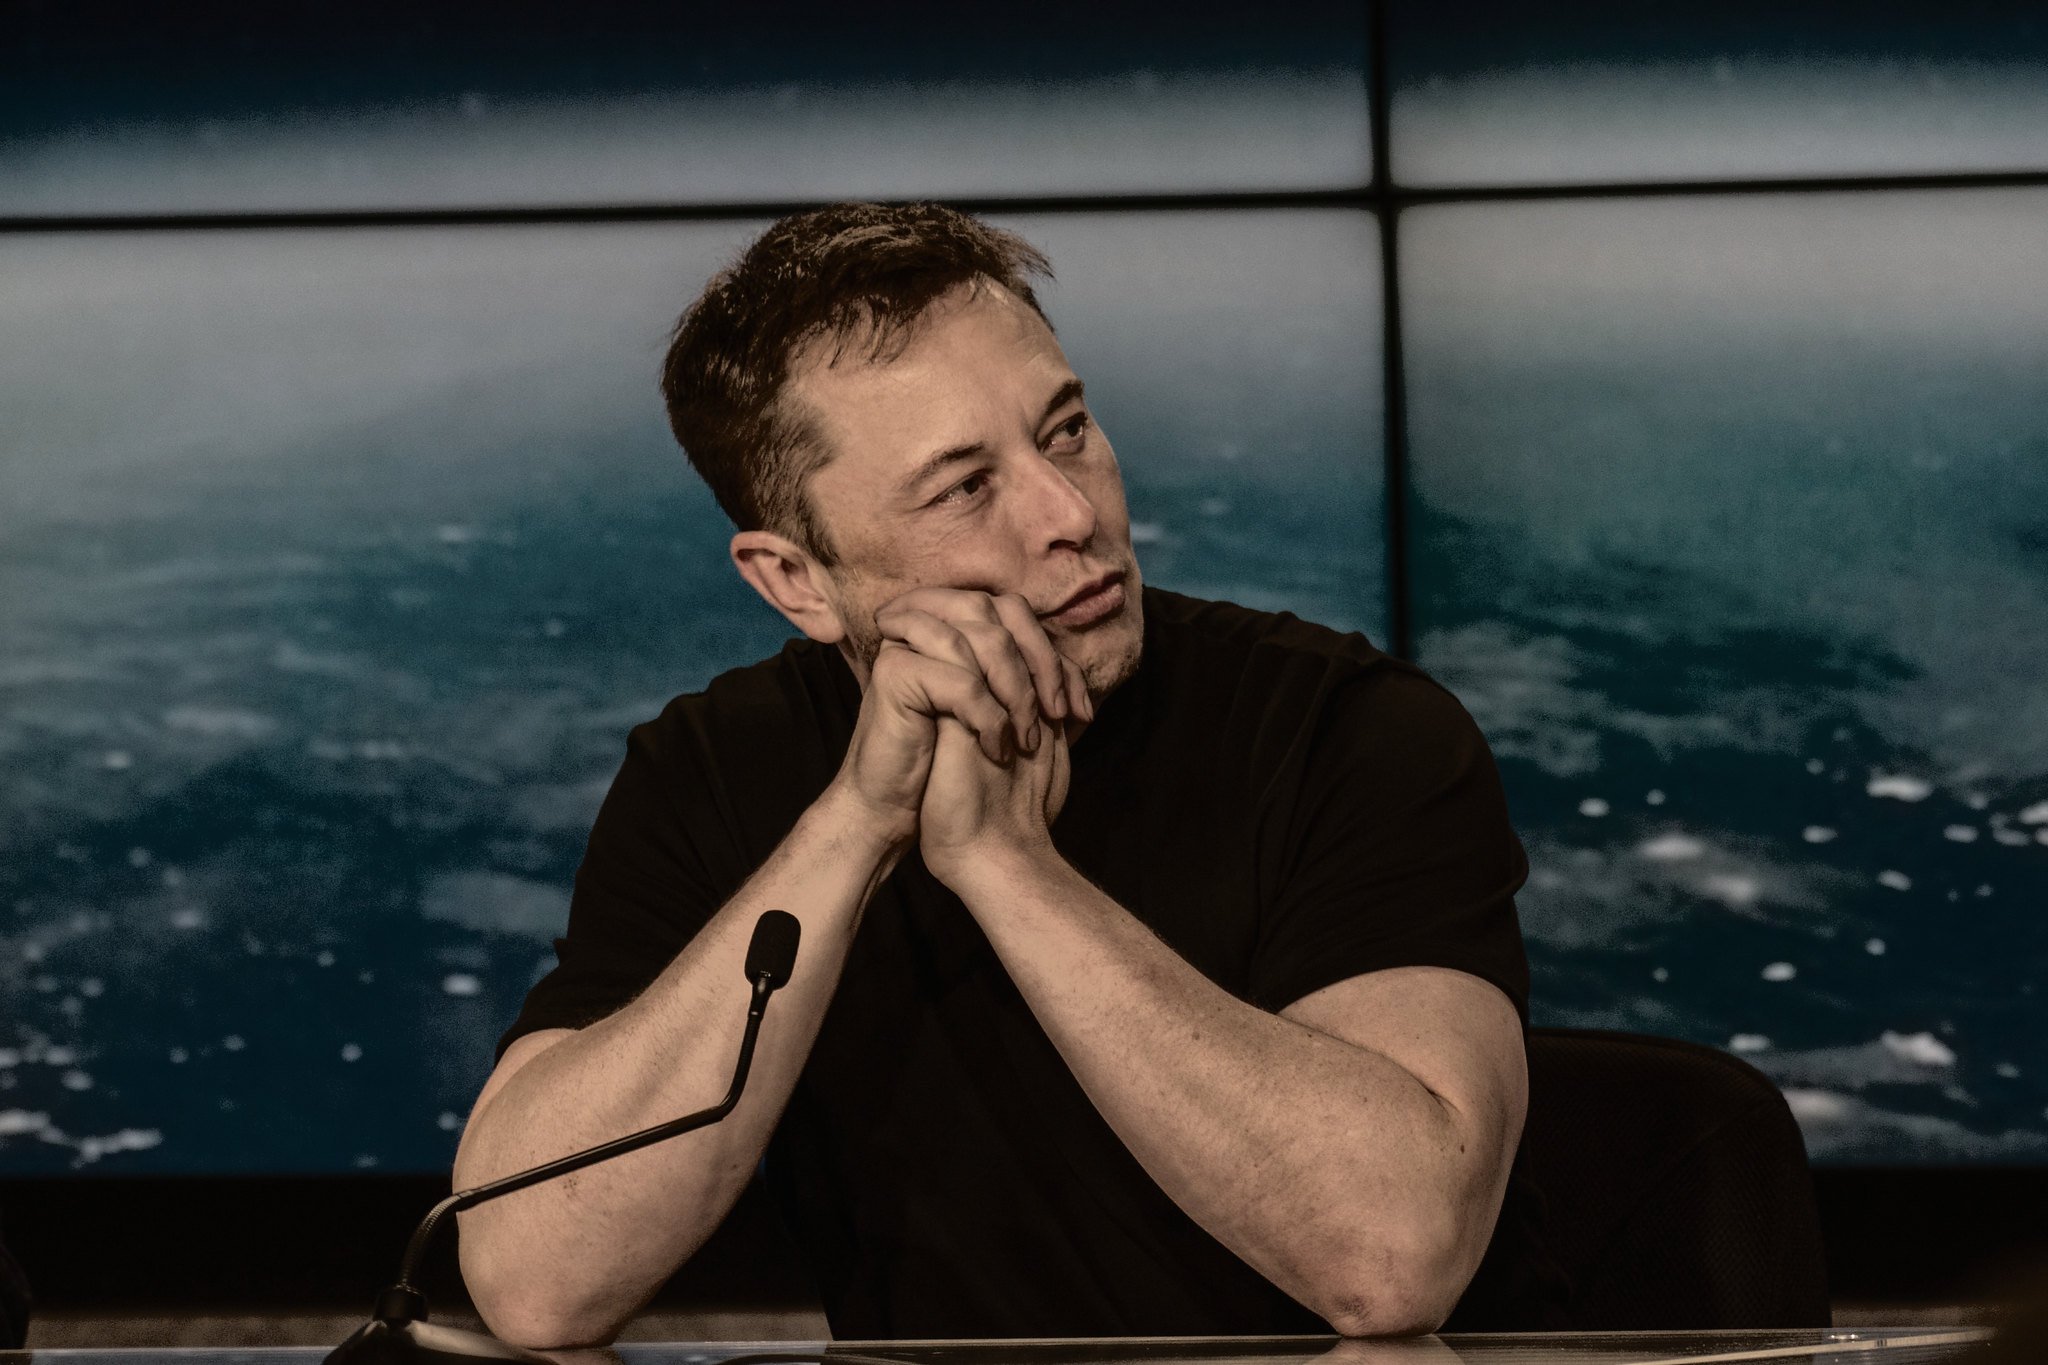 elon musk clasping his hands with a concerned or concentrated look